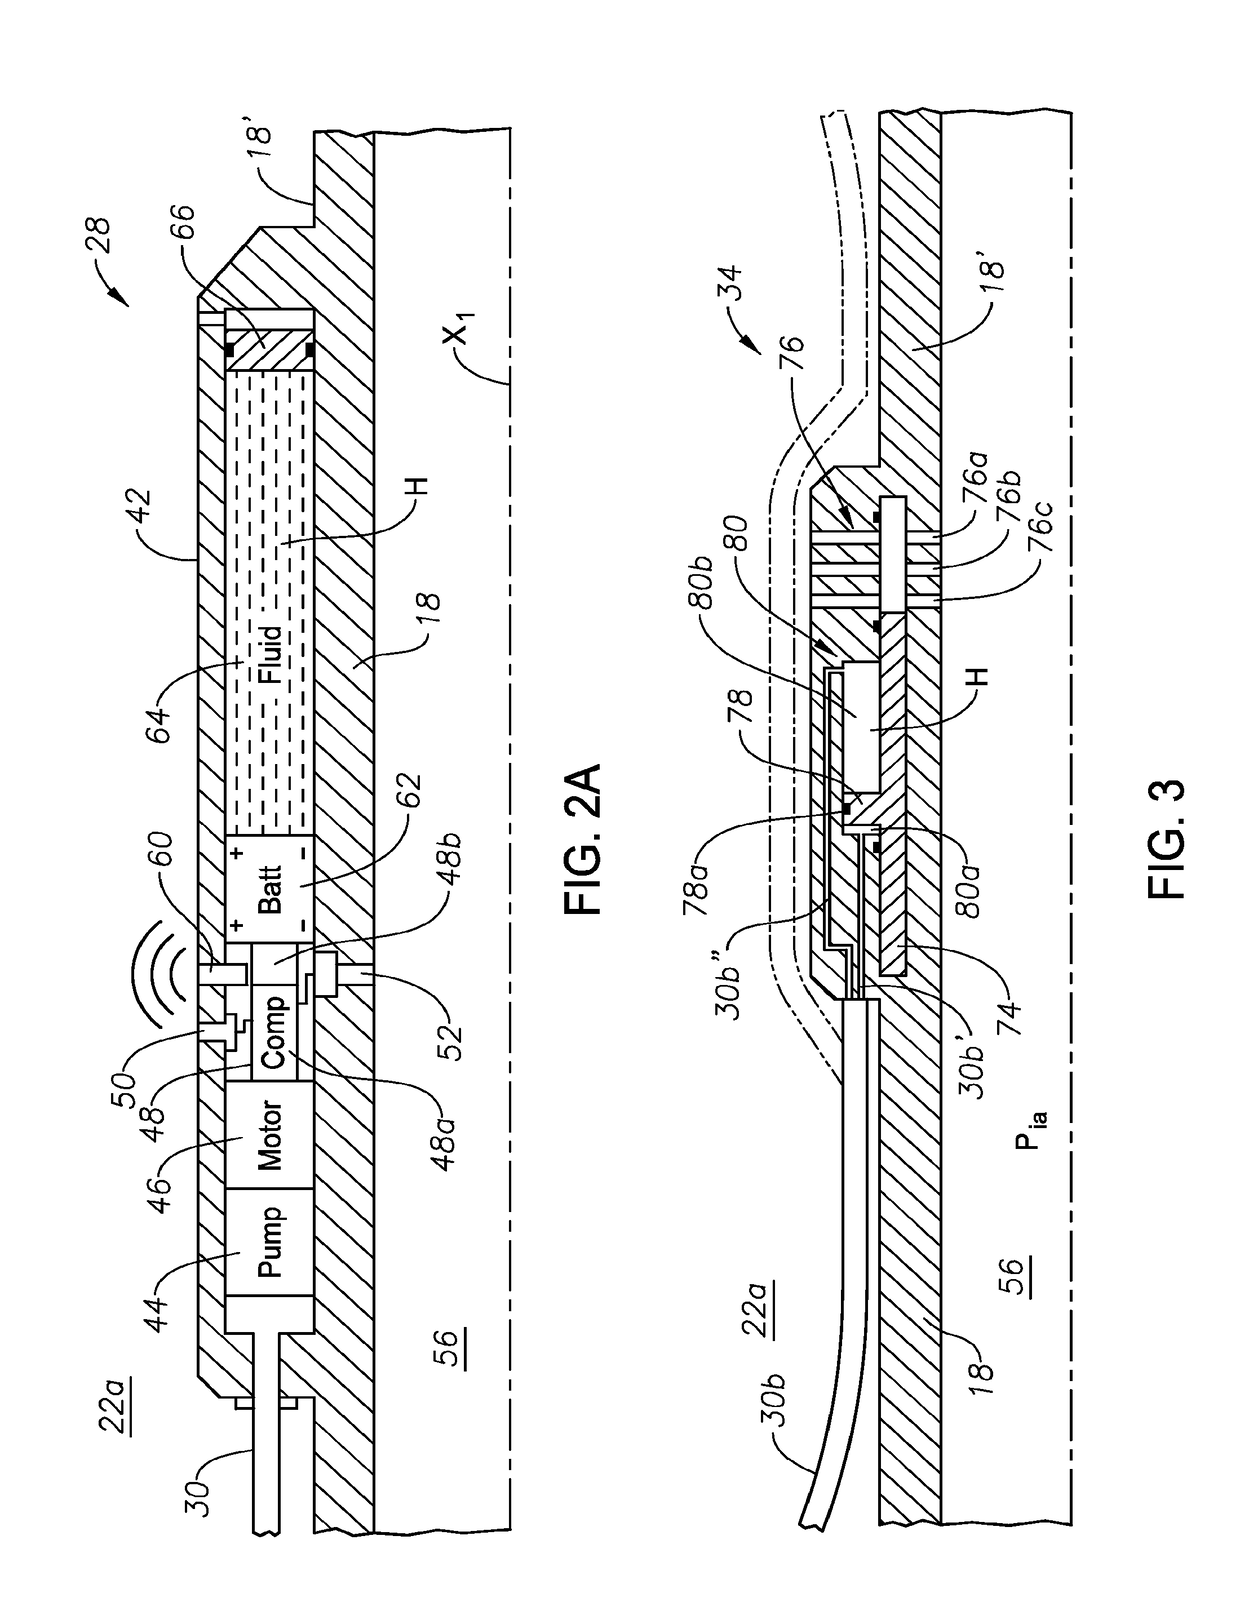 Remotely operated and multi-functional down-hole control tools